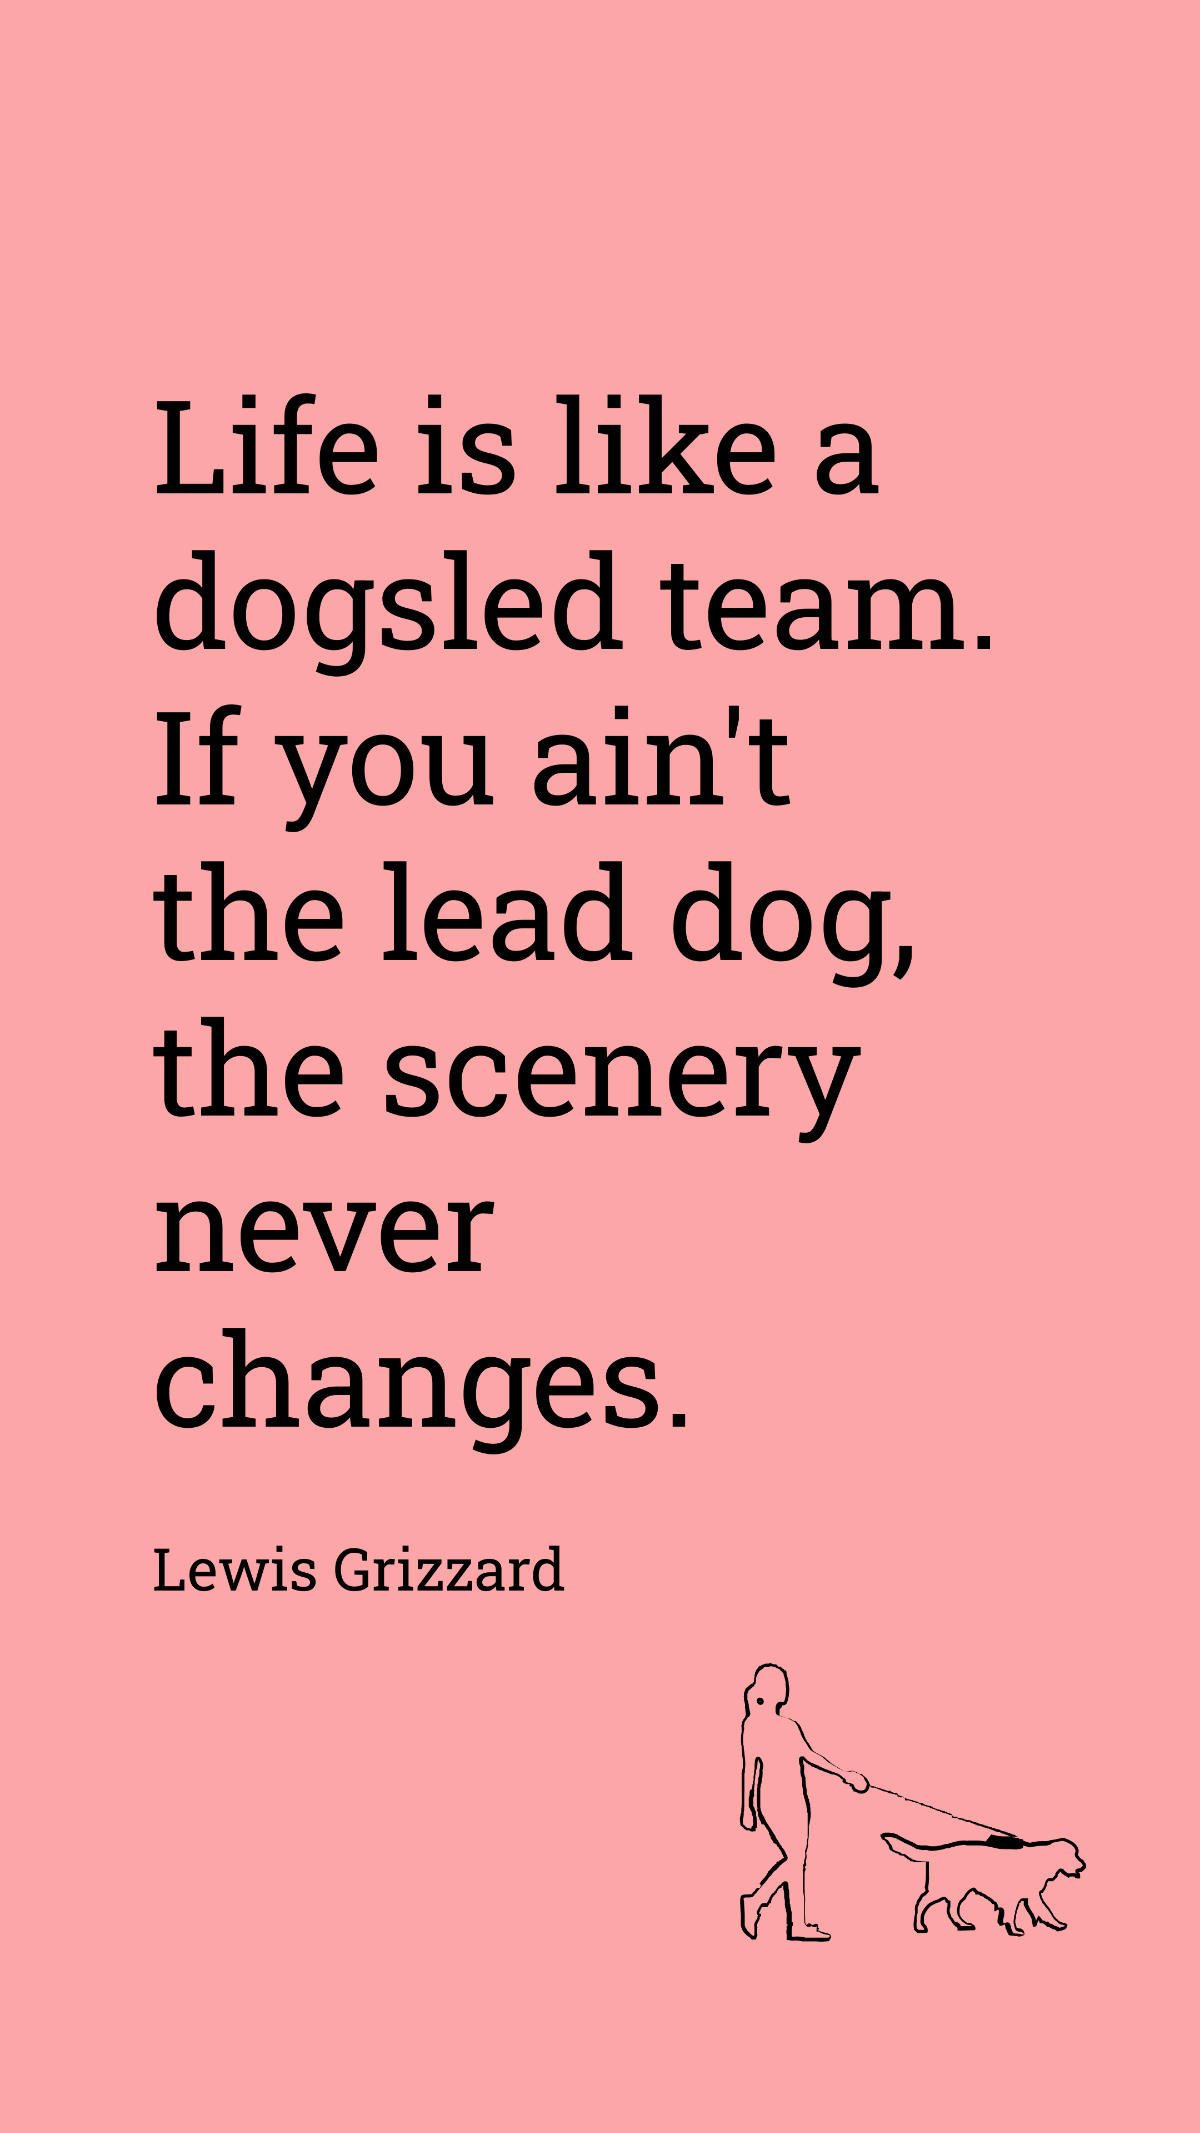 Free Lewis Grizzard - Life is like a dogsled team. If you ain't the lead dog, the scenery never changes. Template